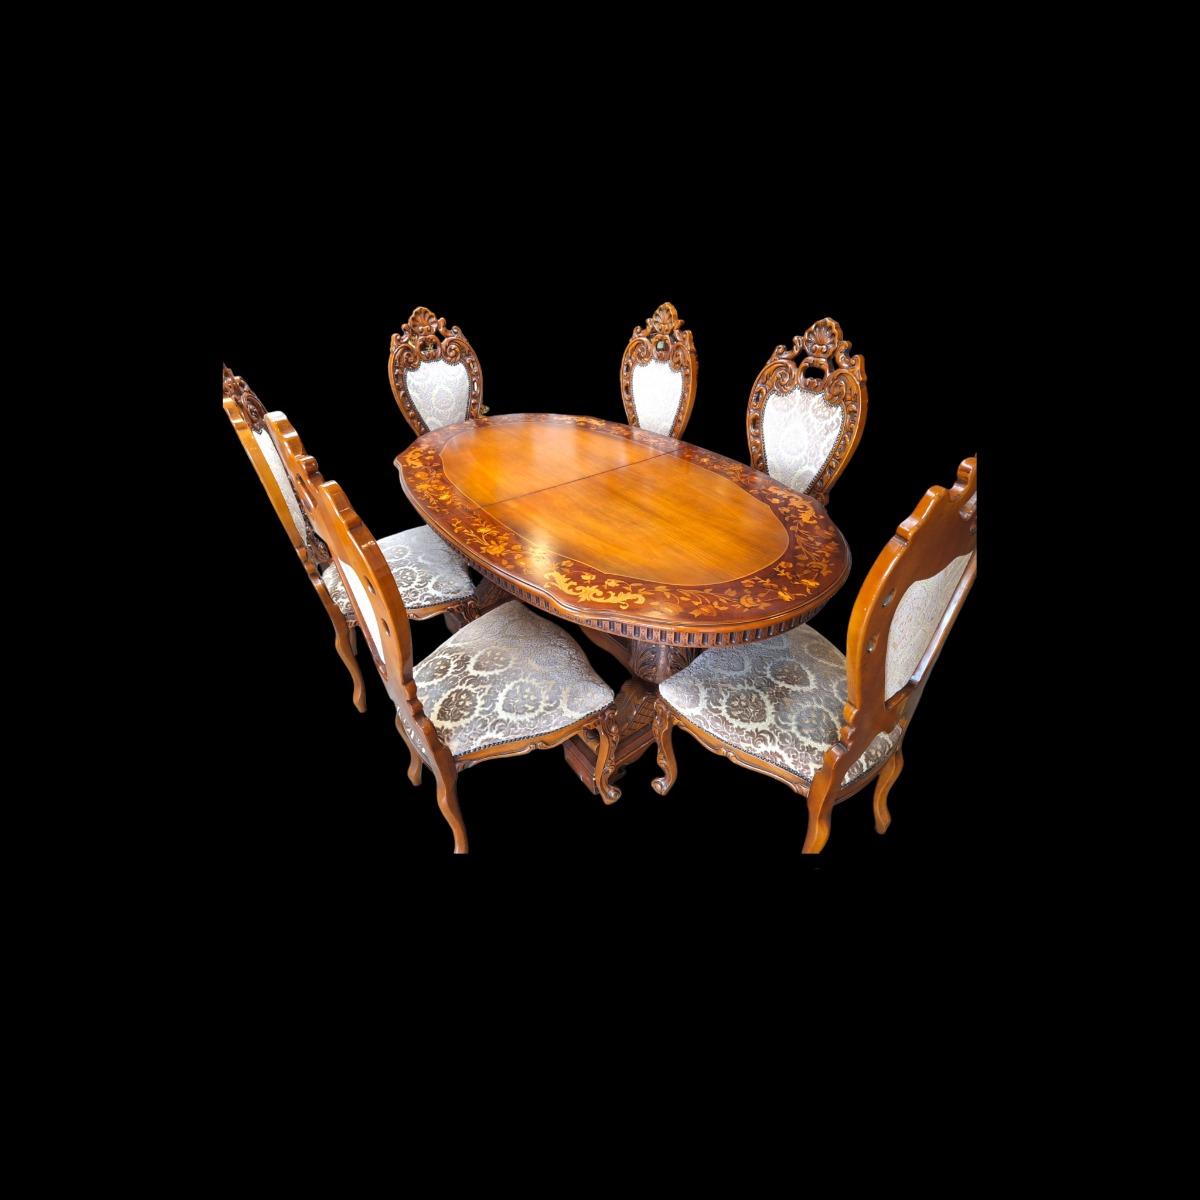 Italian style  marquetry dining set with cabinet and table.